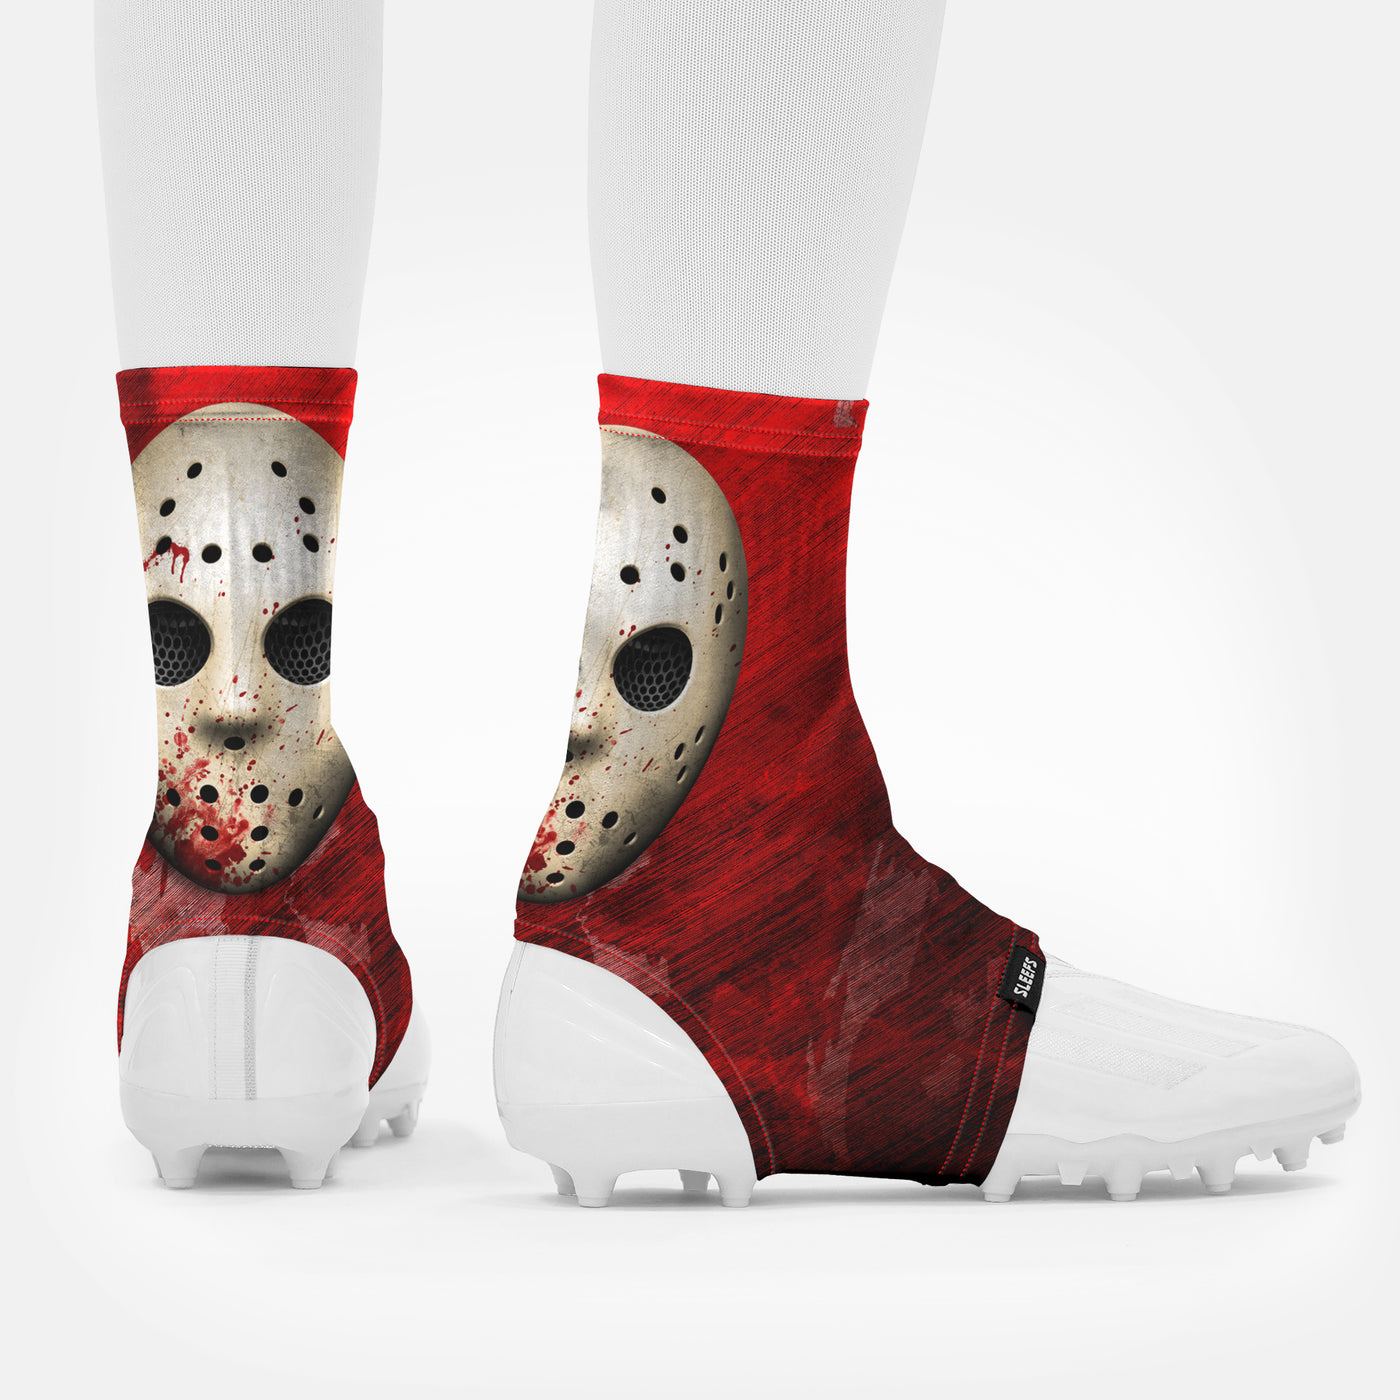 Hockey Mask Spats / Cleat Covers